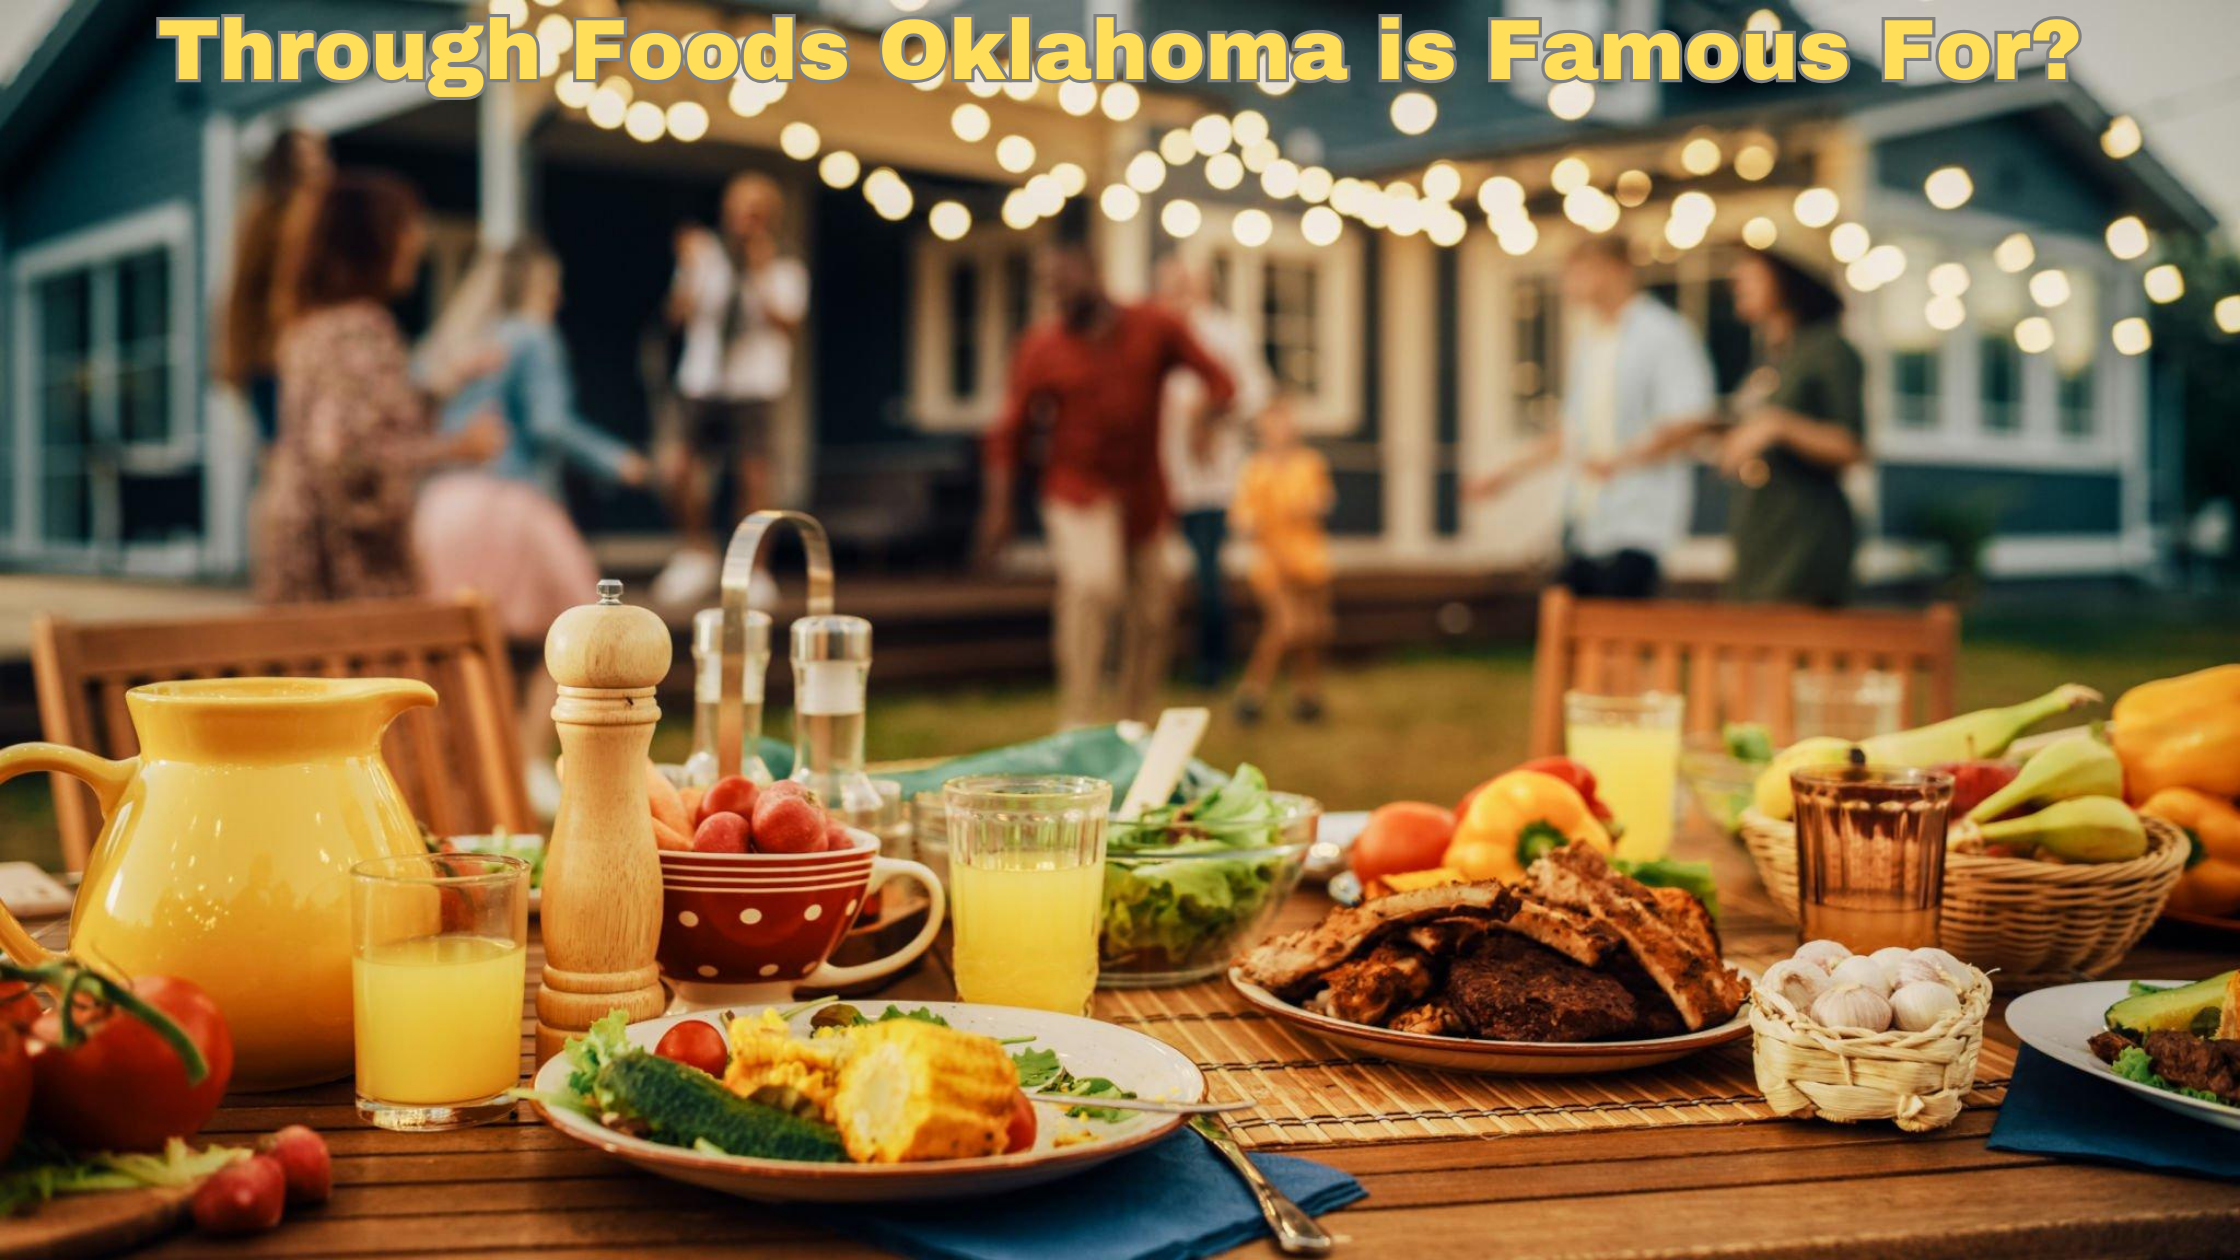 Through Foods Oklahoma is Famous For